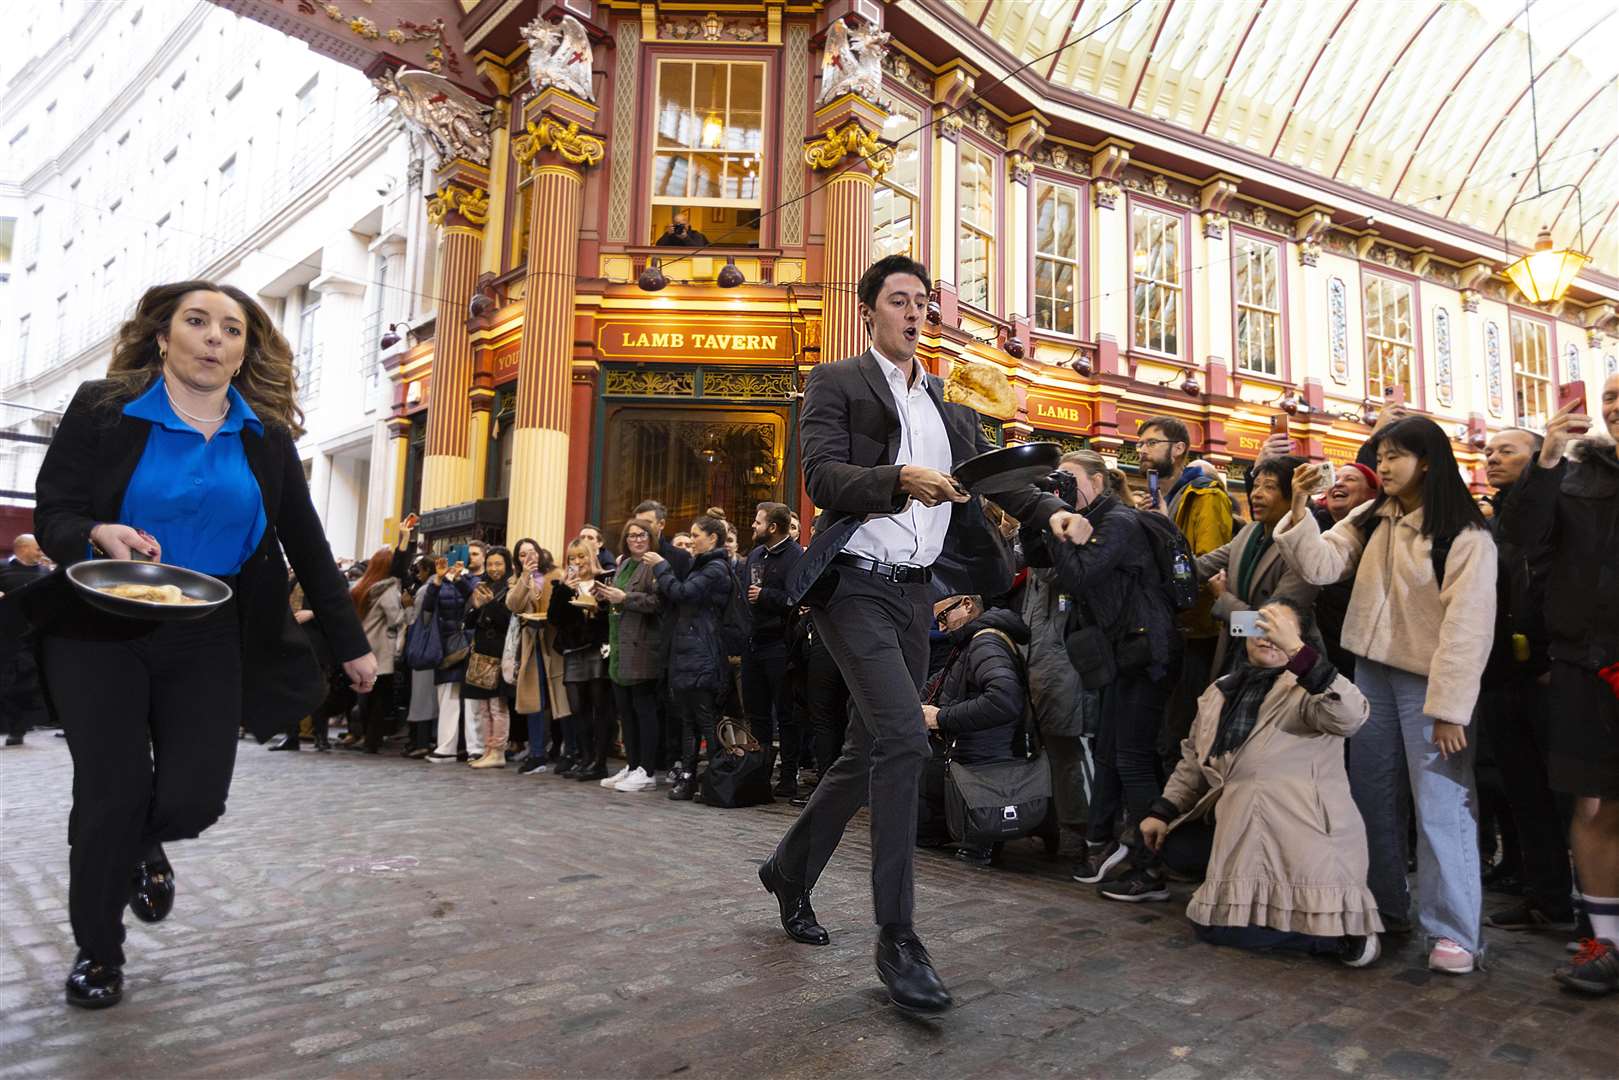 Two well-dressed individuals vying for the golden frying pan trophy at the yearly Leadenhall Market pancake race in London in February (PA)